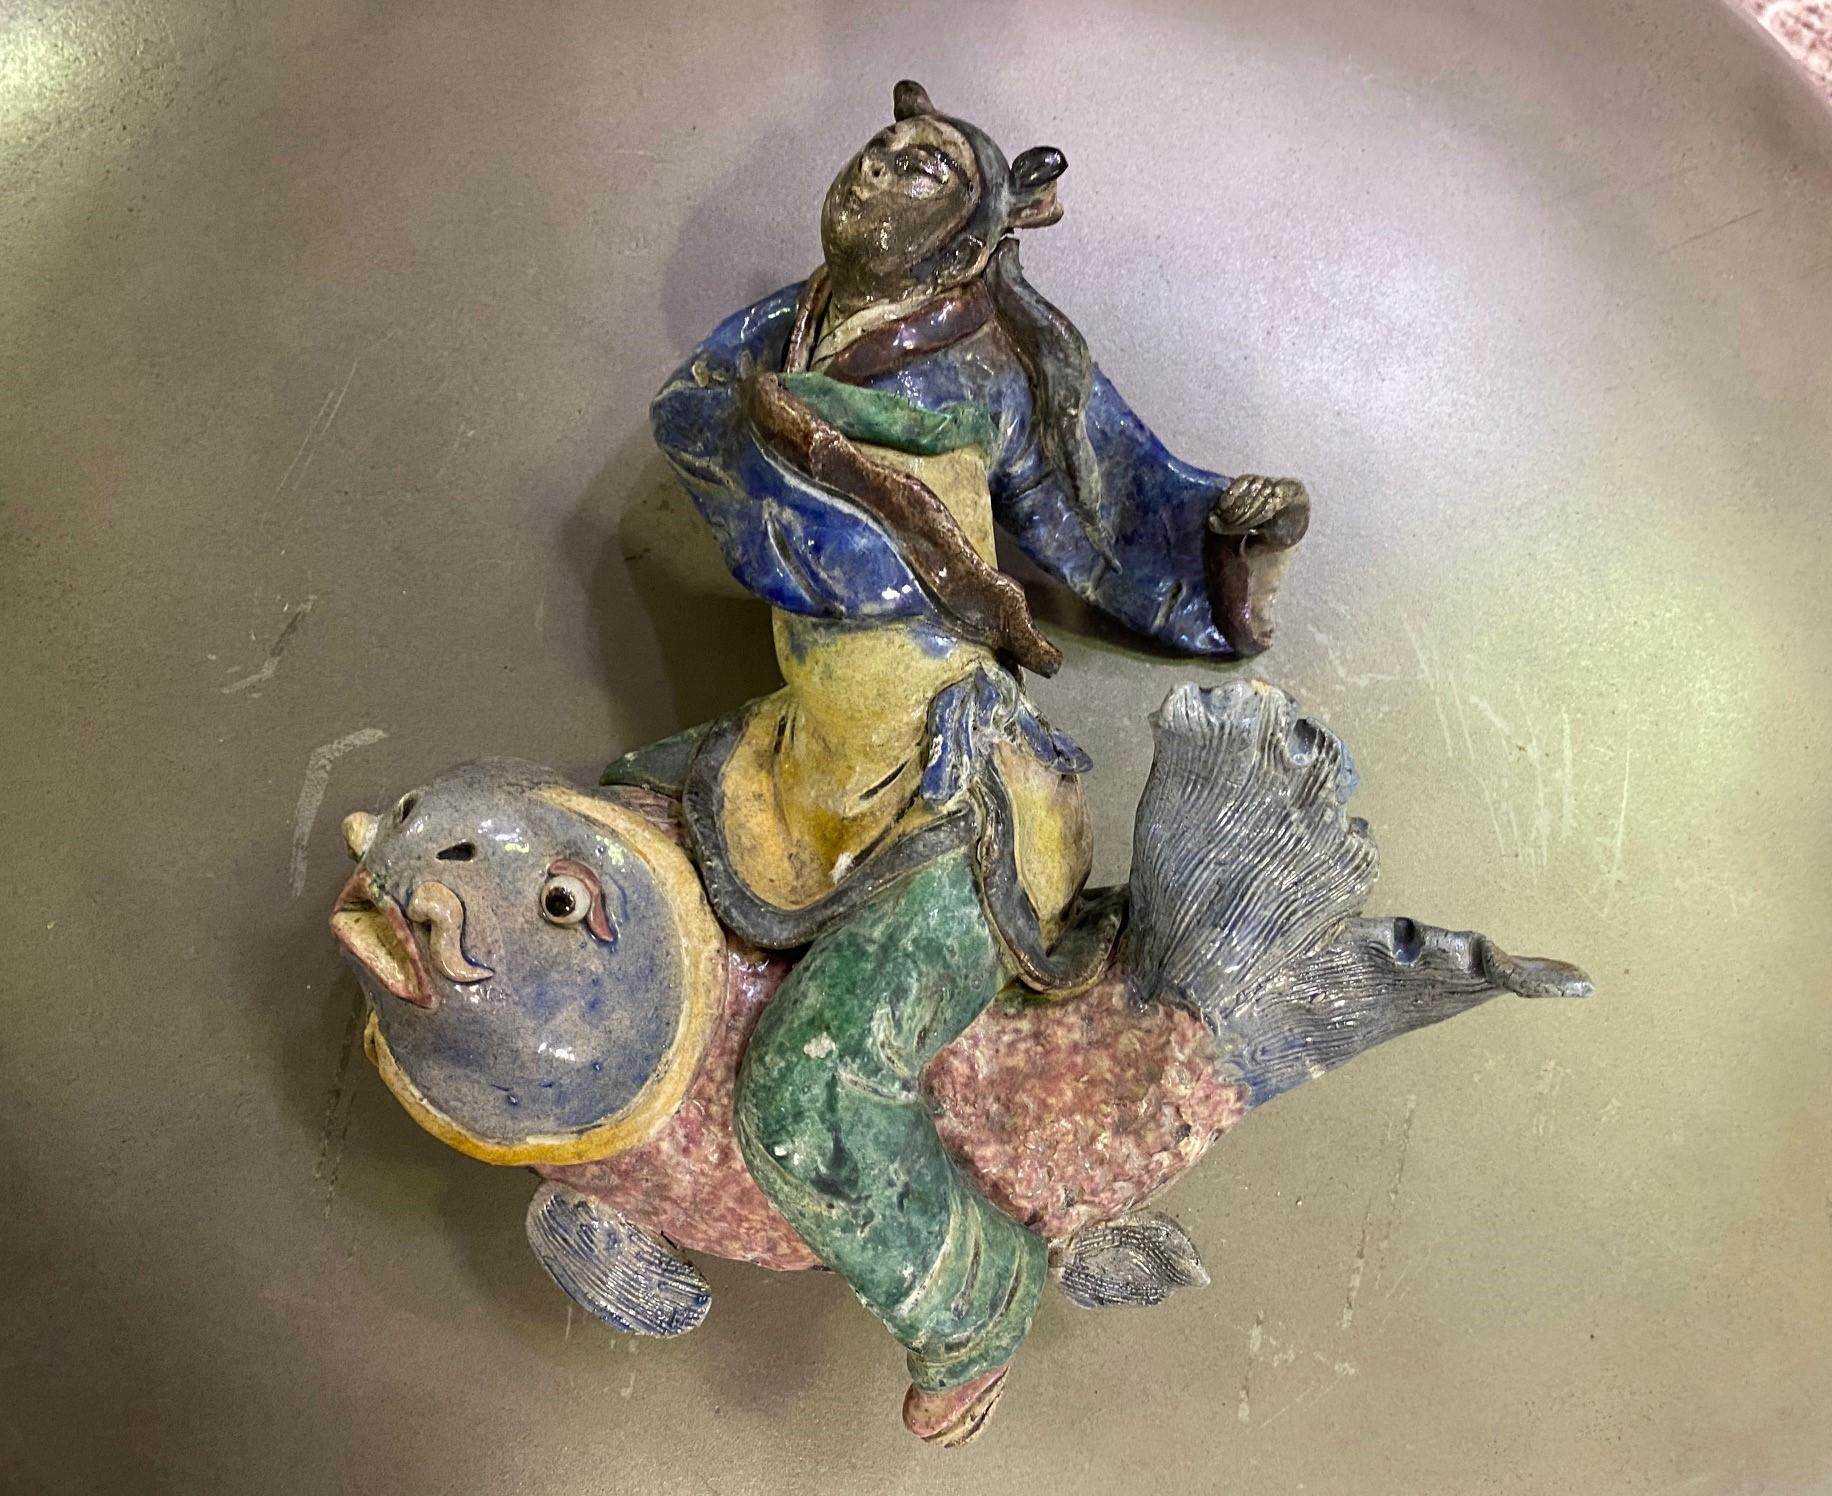 A fantastic piece. Wonderfully glazed and colored work of a seated woman with flowing robes riding a mythical fish. 

We believe this is Qing dynasty (1644-1912) but this is not our area of expertise so are listing it simply as the early 20th